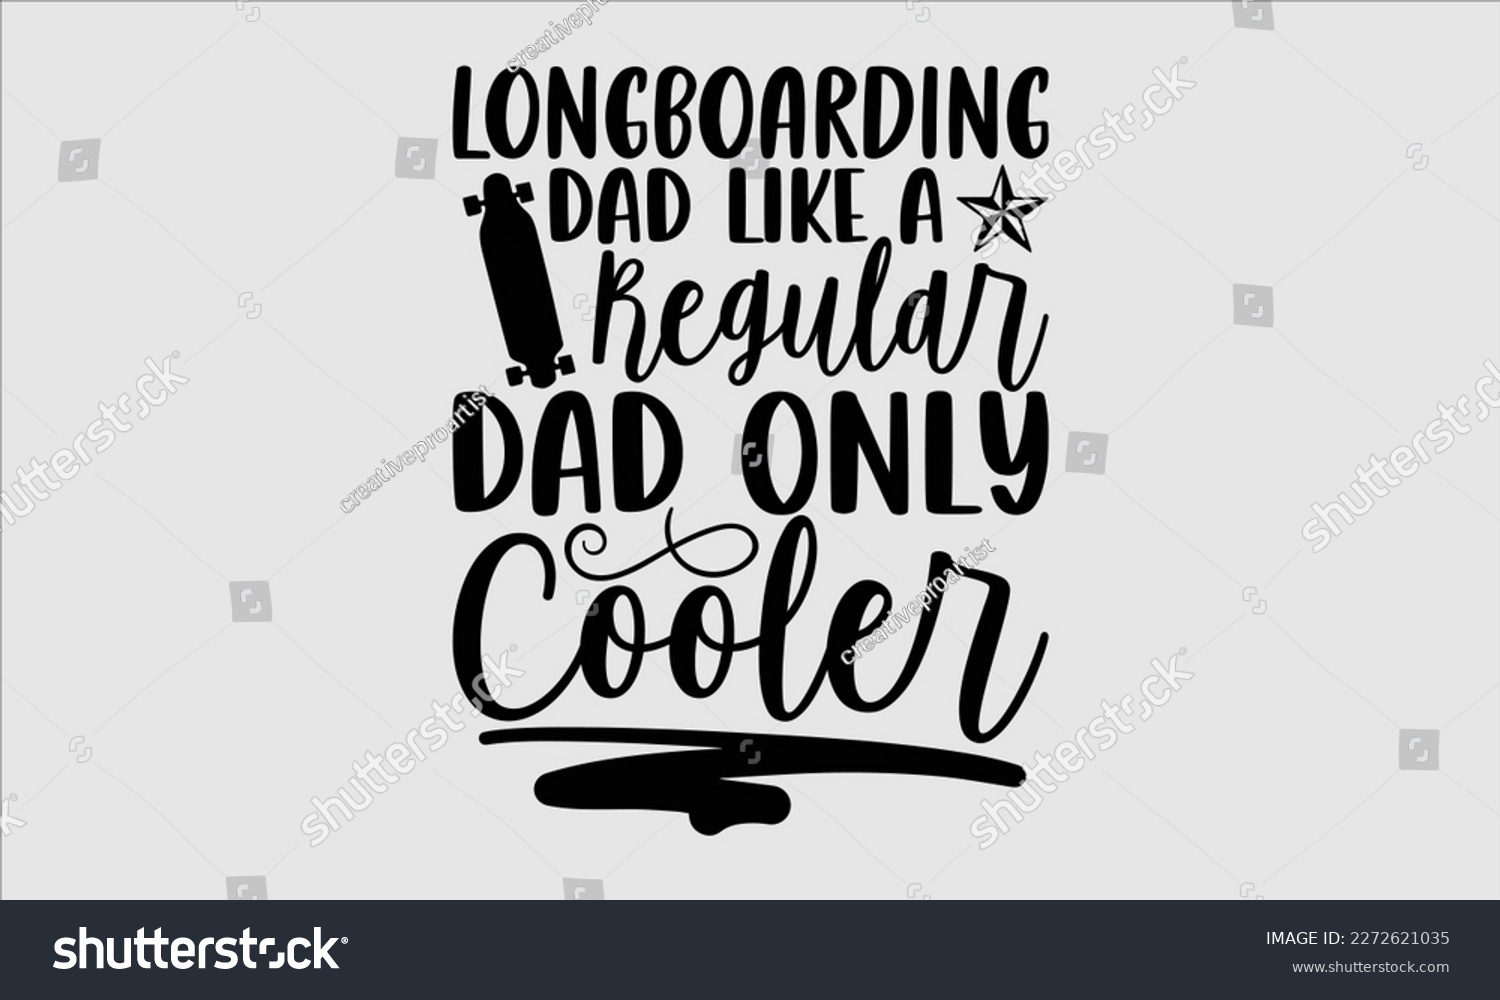 SVG of Longboarding dad like a regular dad only cooler- Longboarding T- shirt Design, Hand drawn lettering phrase, Illustration for prints on t-shirts and bags, posters, funny eps files, svg cricut svg